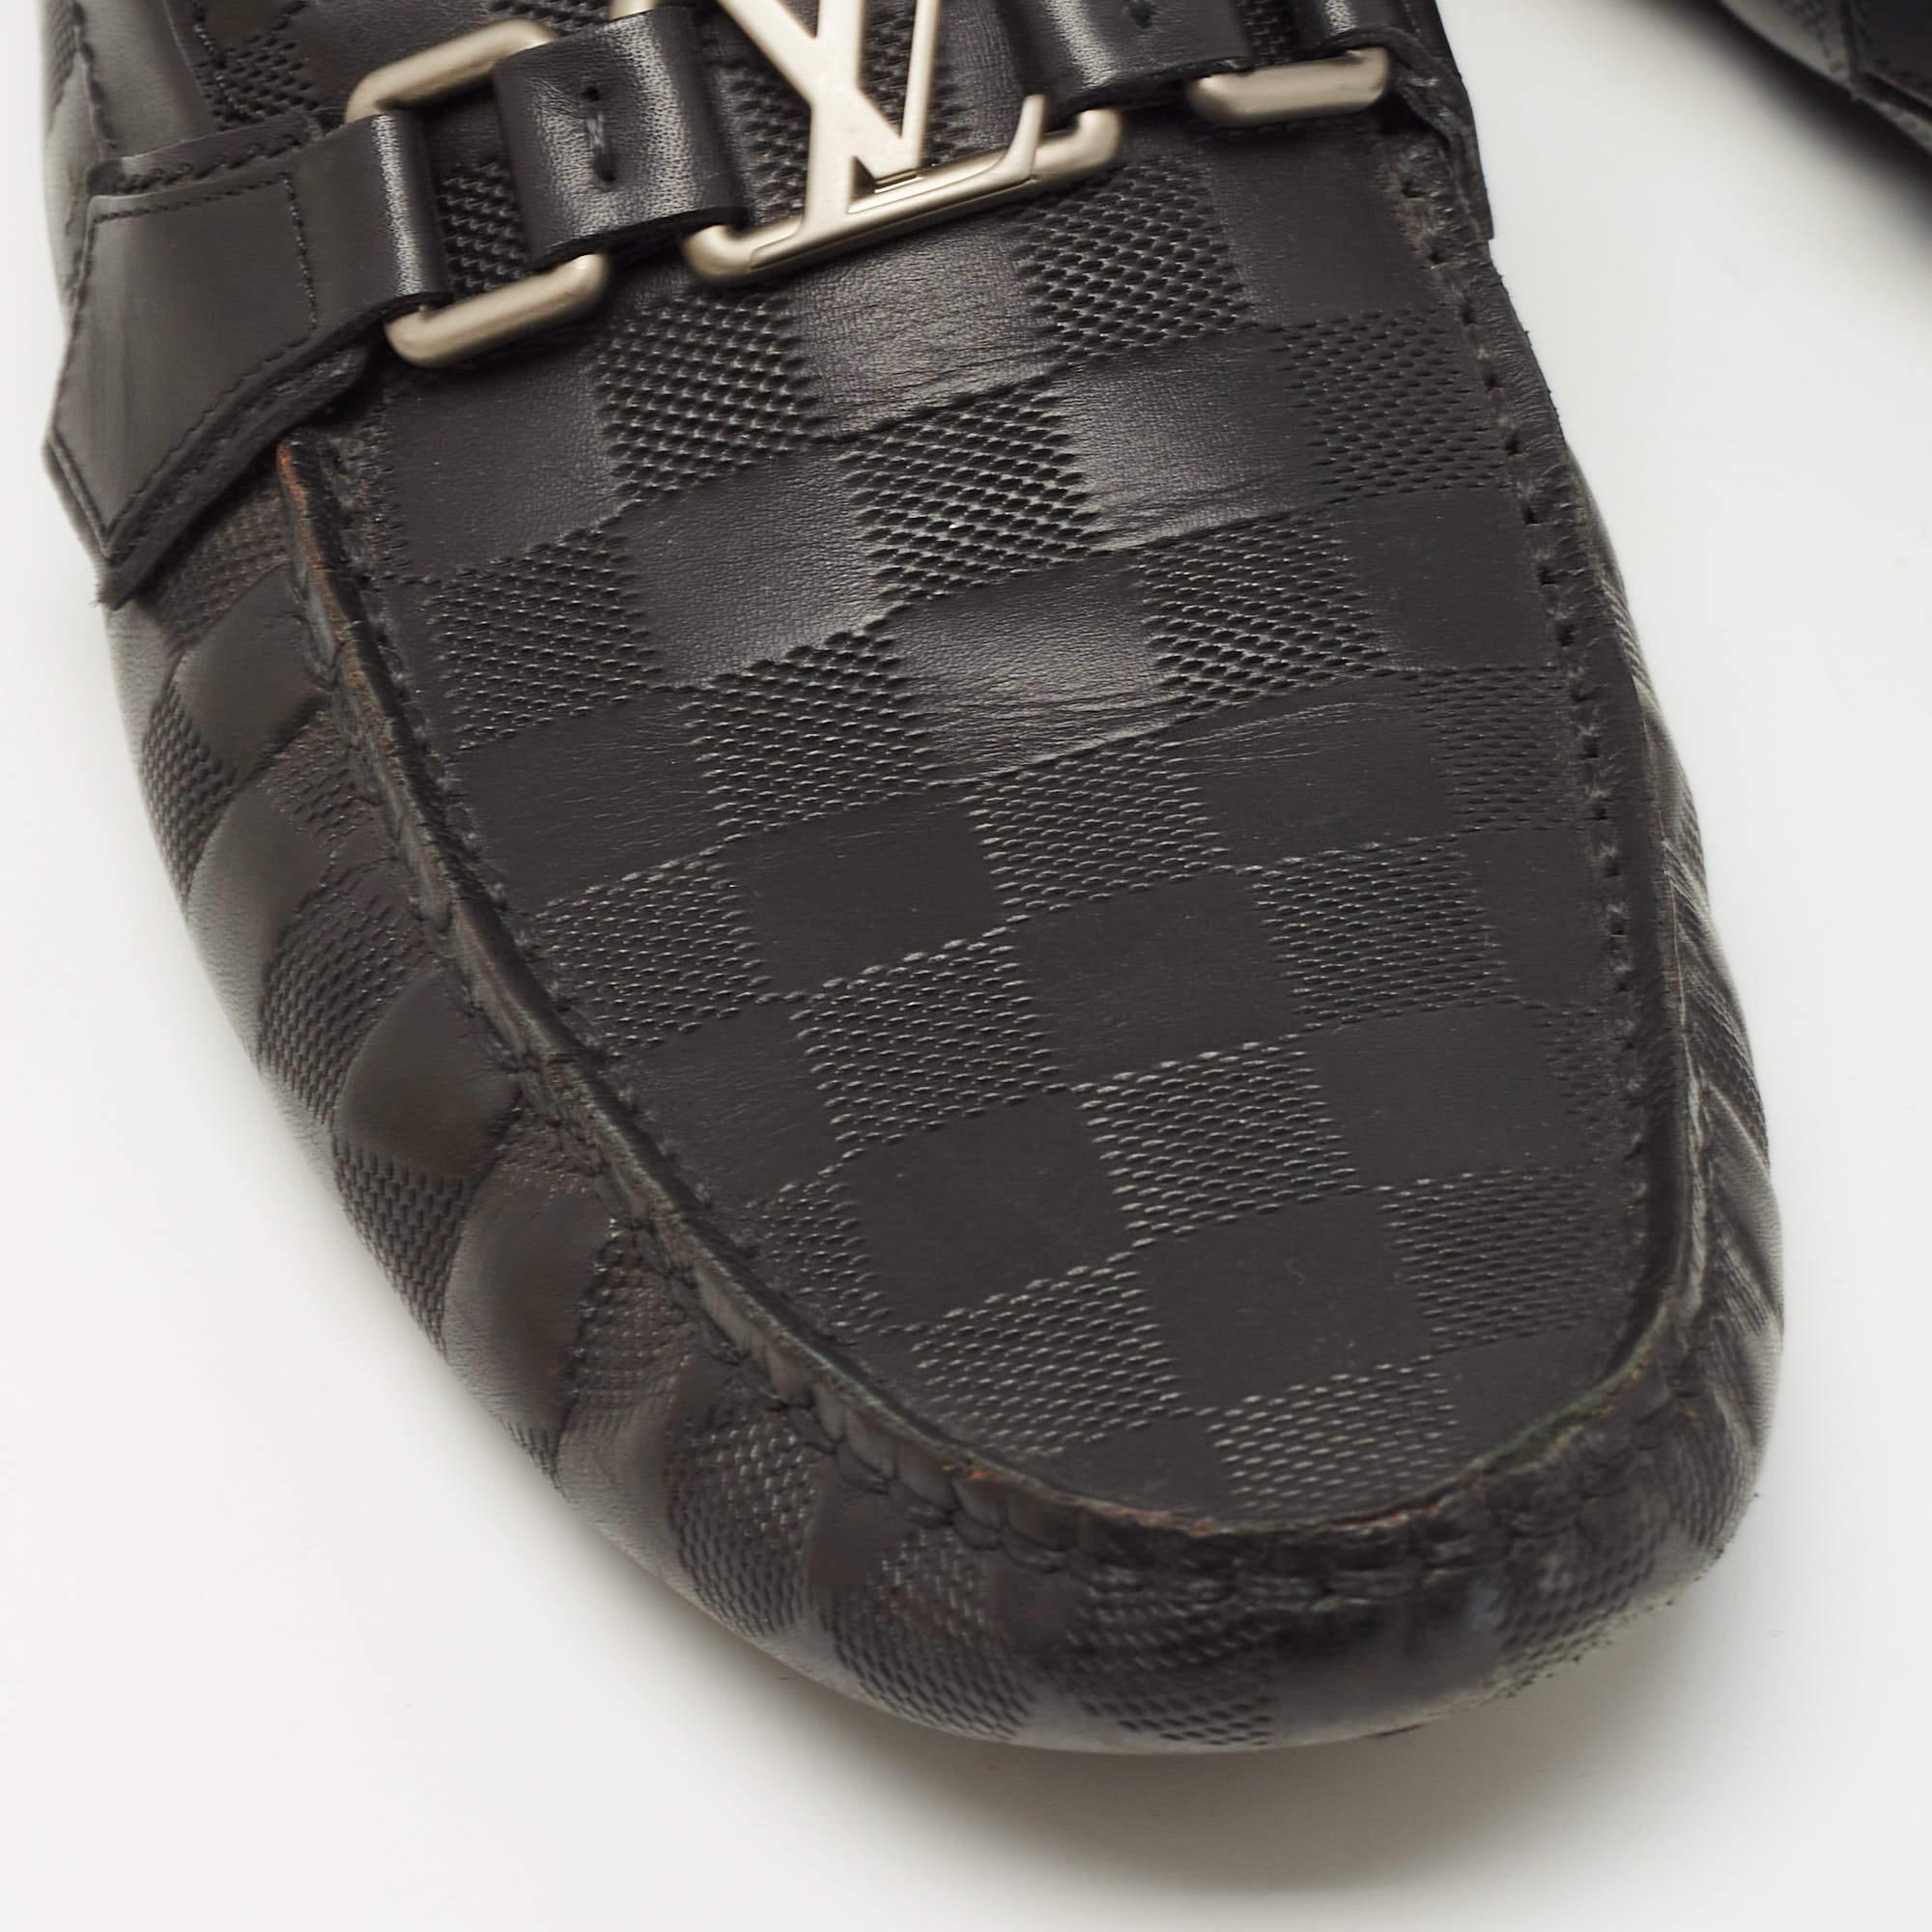 Louis Vuitton Black Damier Embossed Leather Hockenheim Loafers Size 43 2